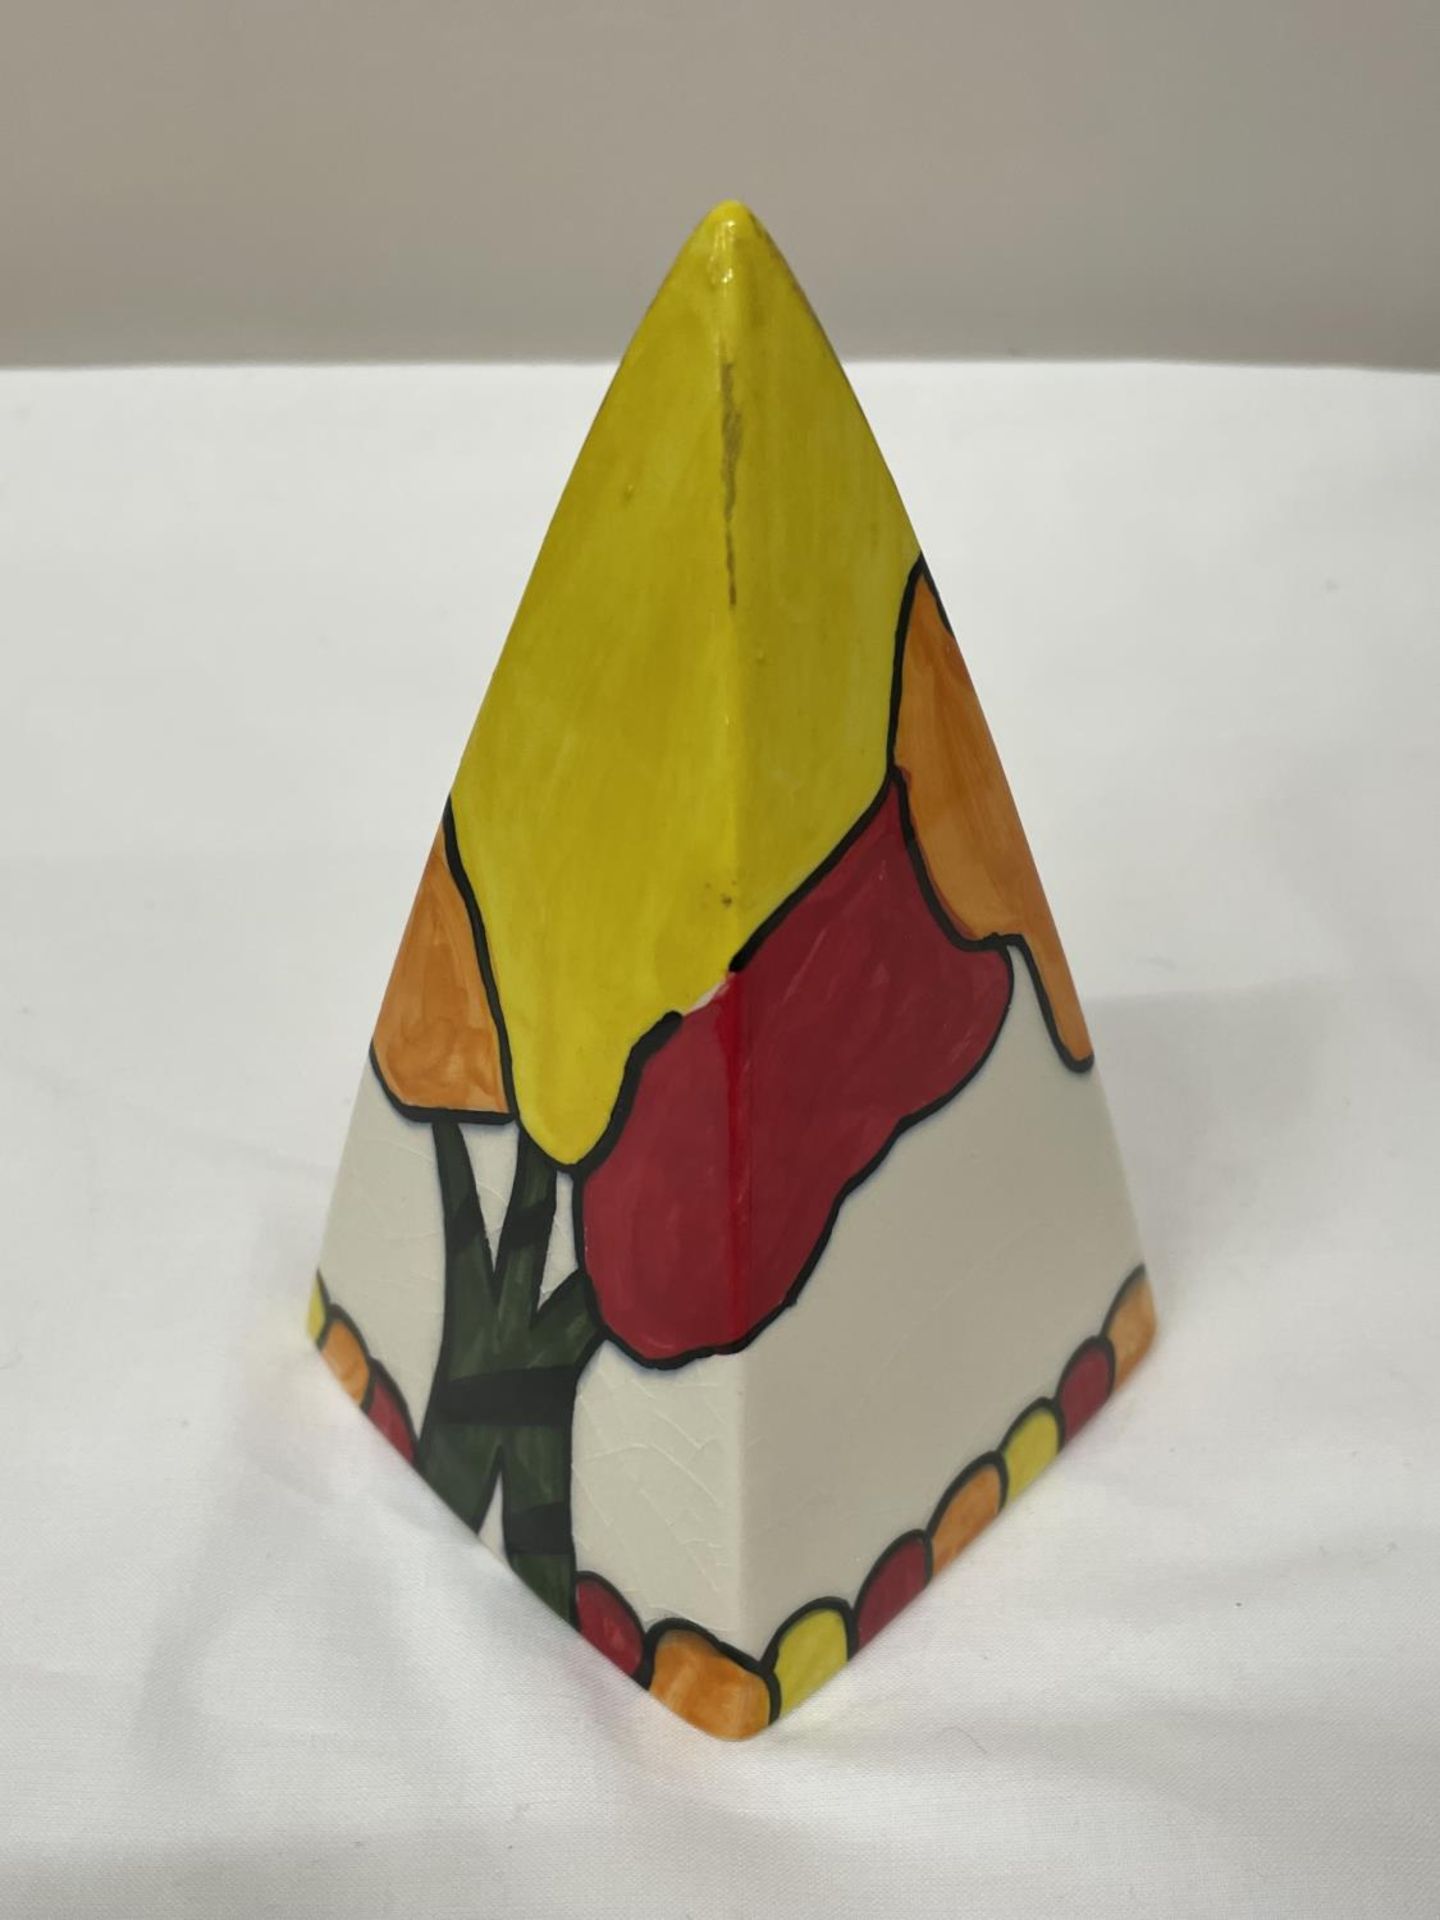 A HANDPAINTED IN STAFFORDSHIRE SUGAR SIFTER TIGER TREES DESIGN IN THE SHAPE OF A PYRAMID - Image 3 of 5